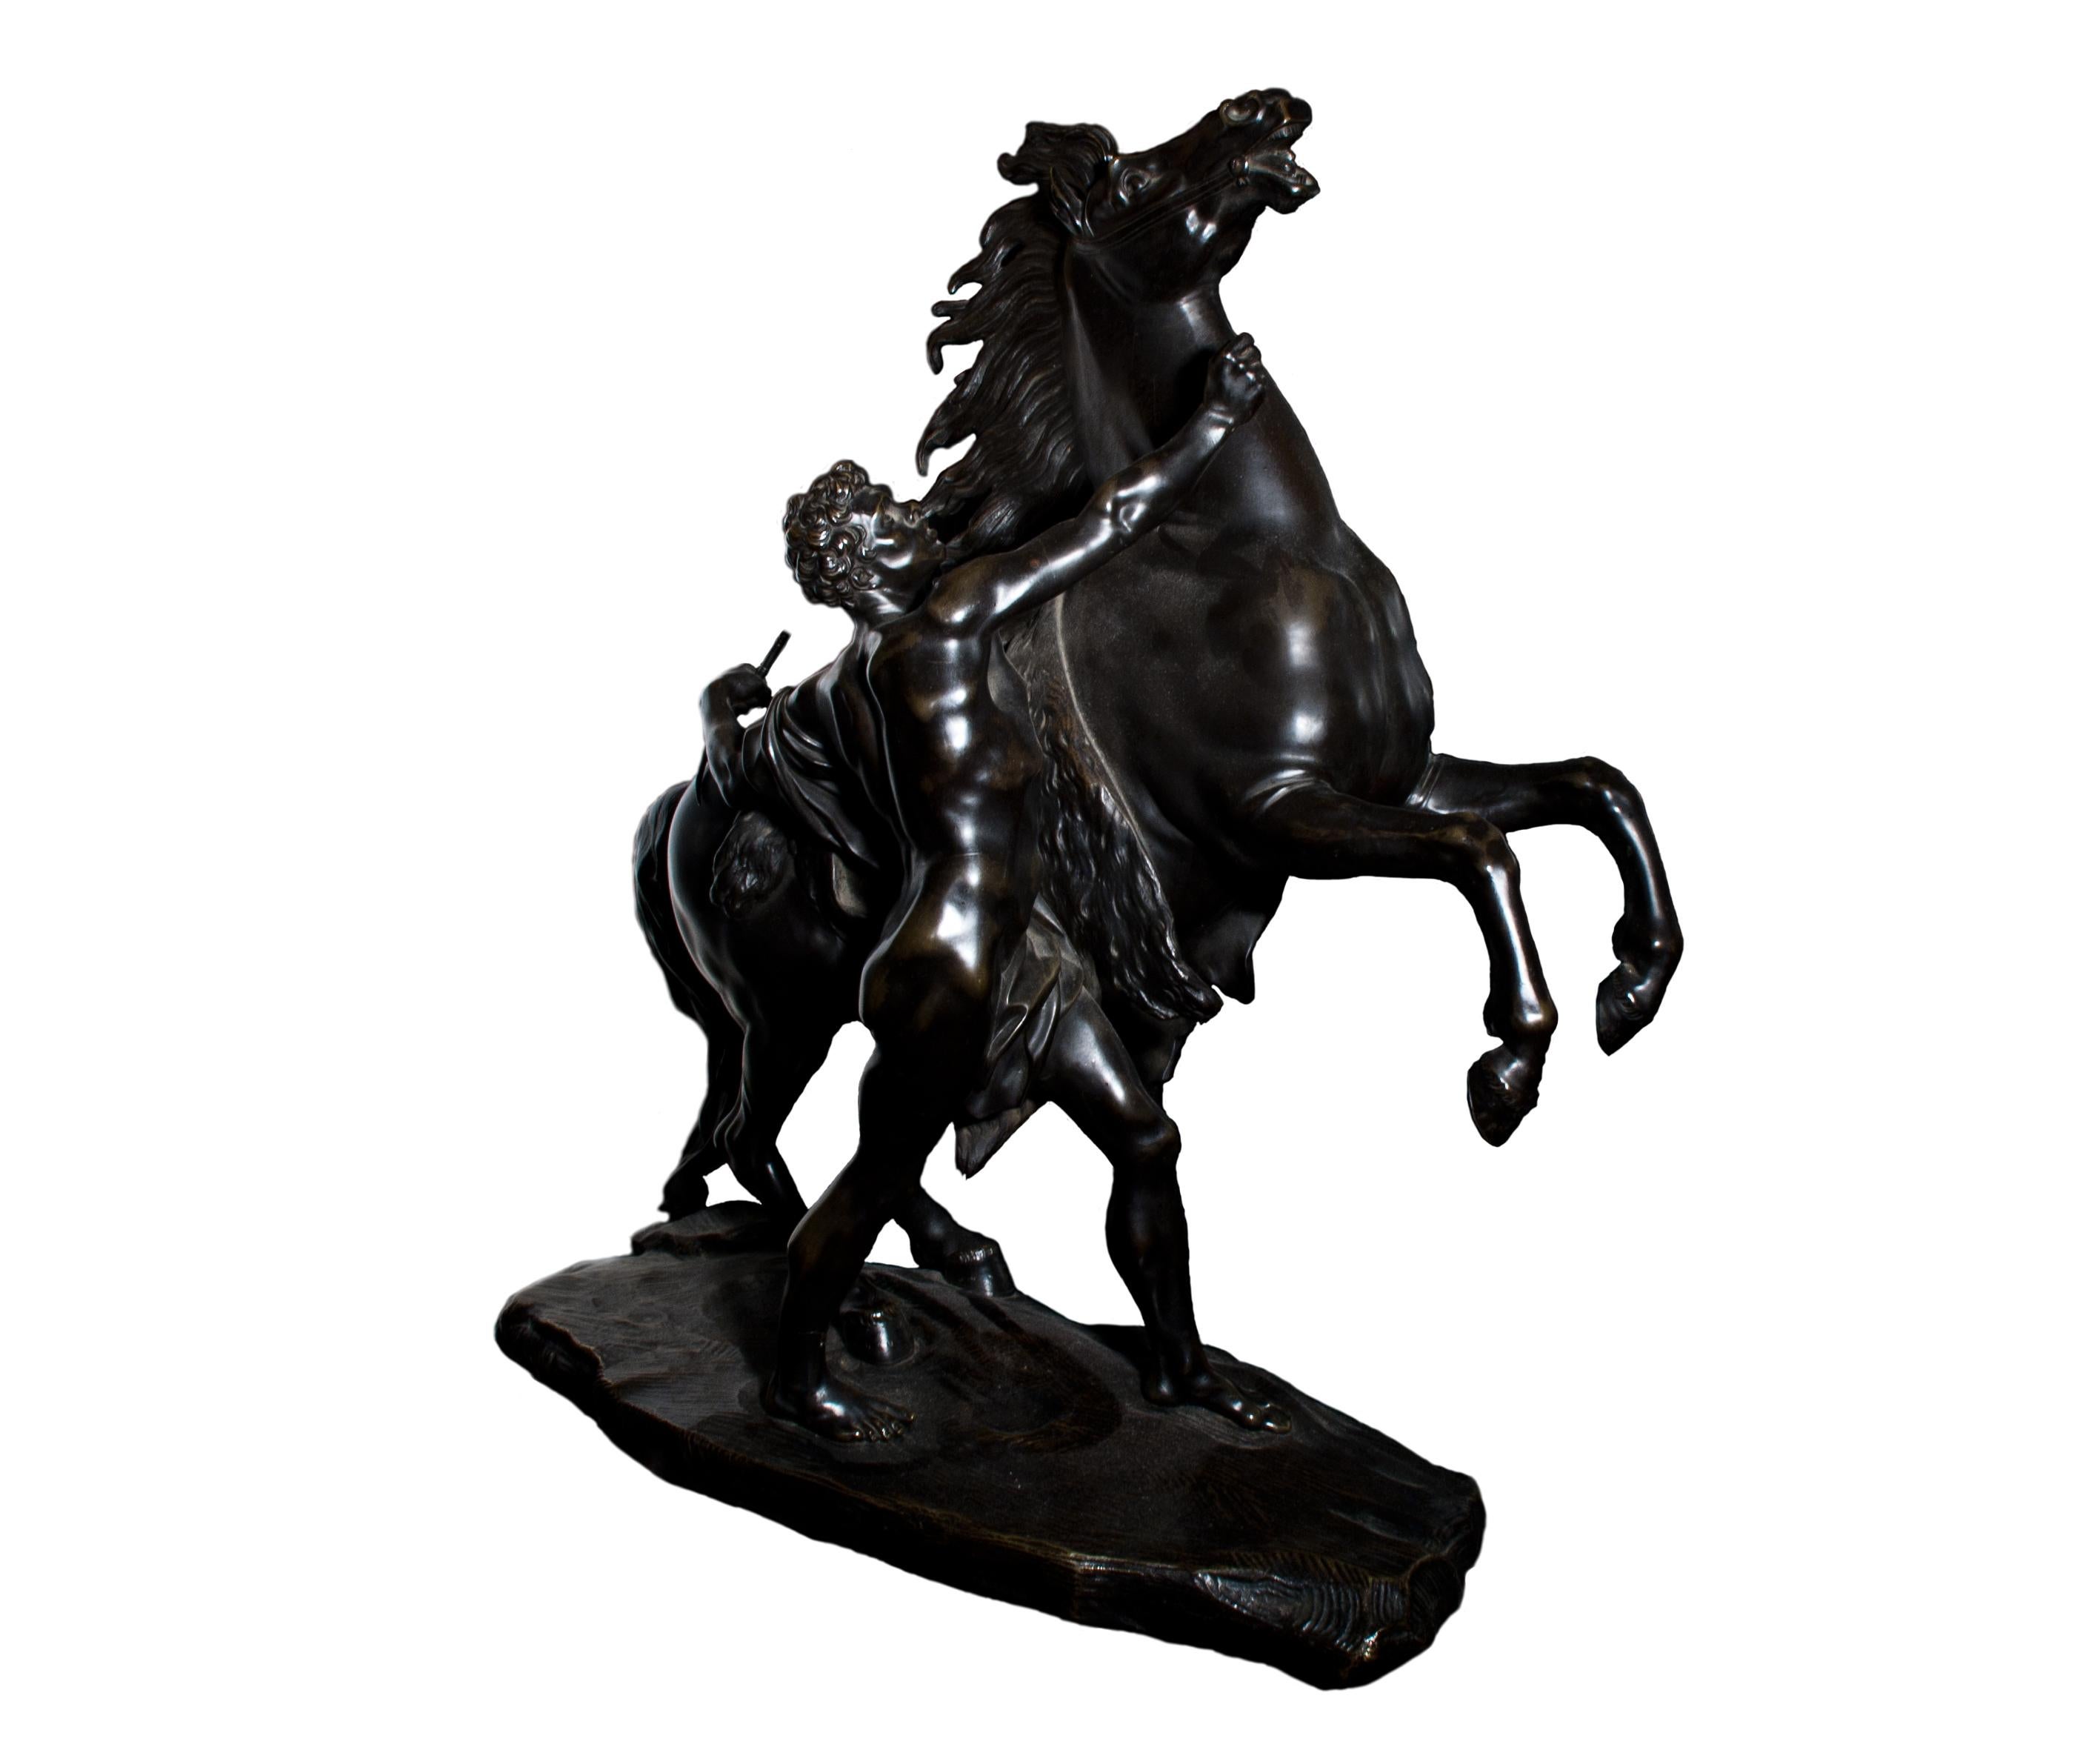 This sculpture Horses and Charioteer is an original decorative object in bronze realized during the 19th century.

Very Good conditions except for the missing bridles.

This object is shipped from Italy. Under existing legislation, any object in